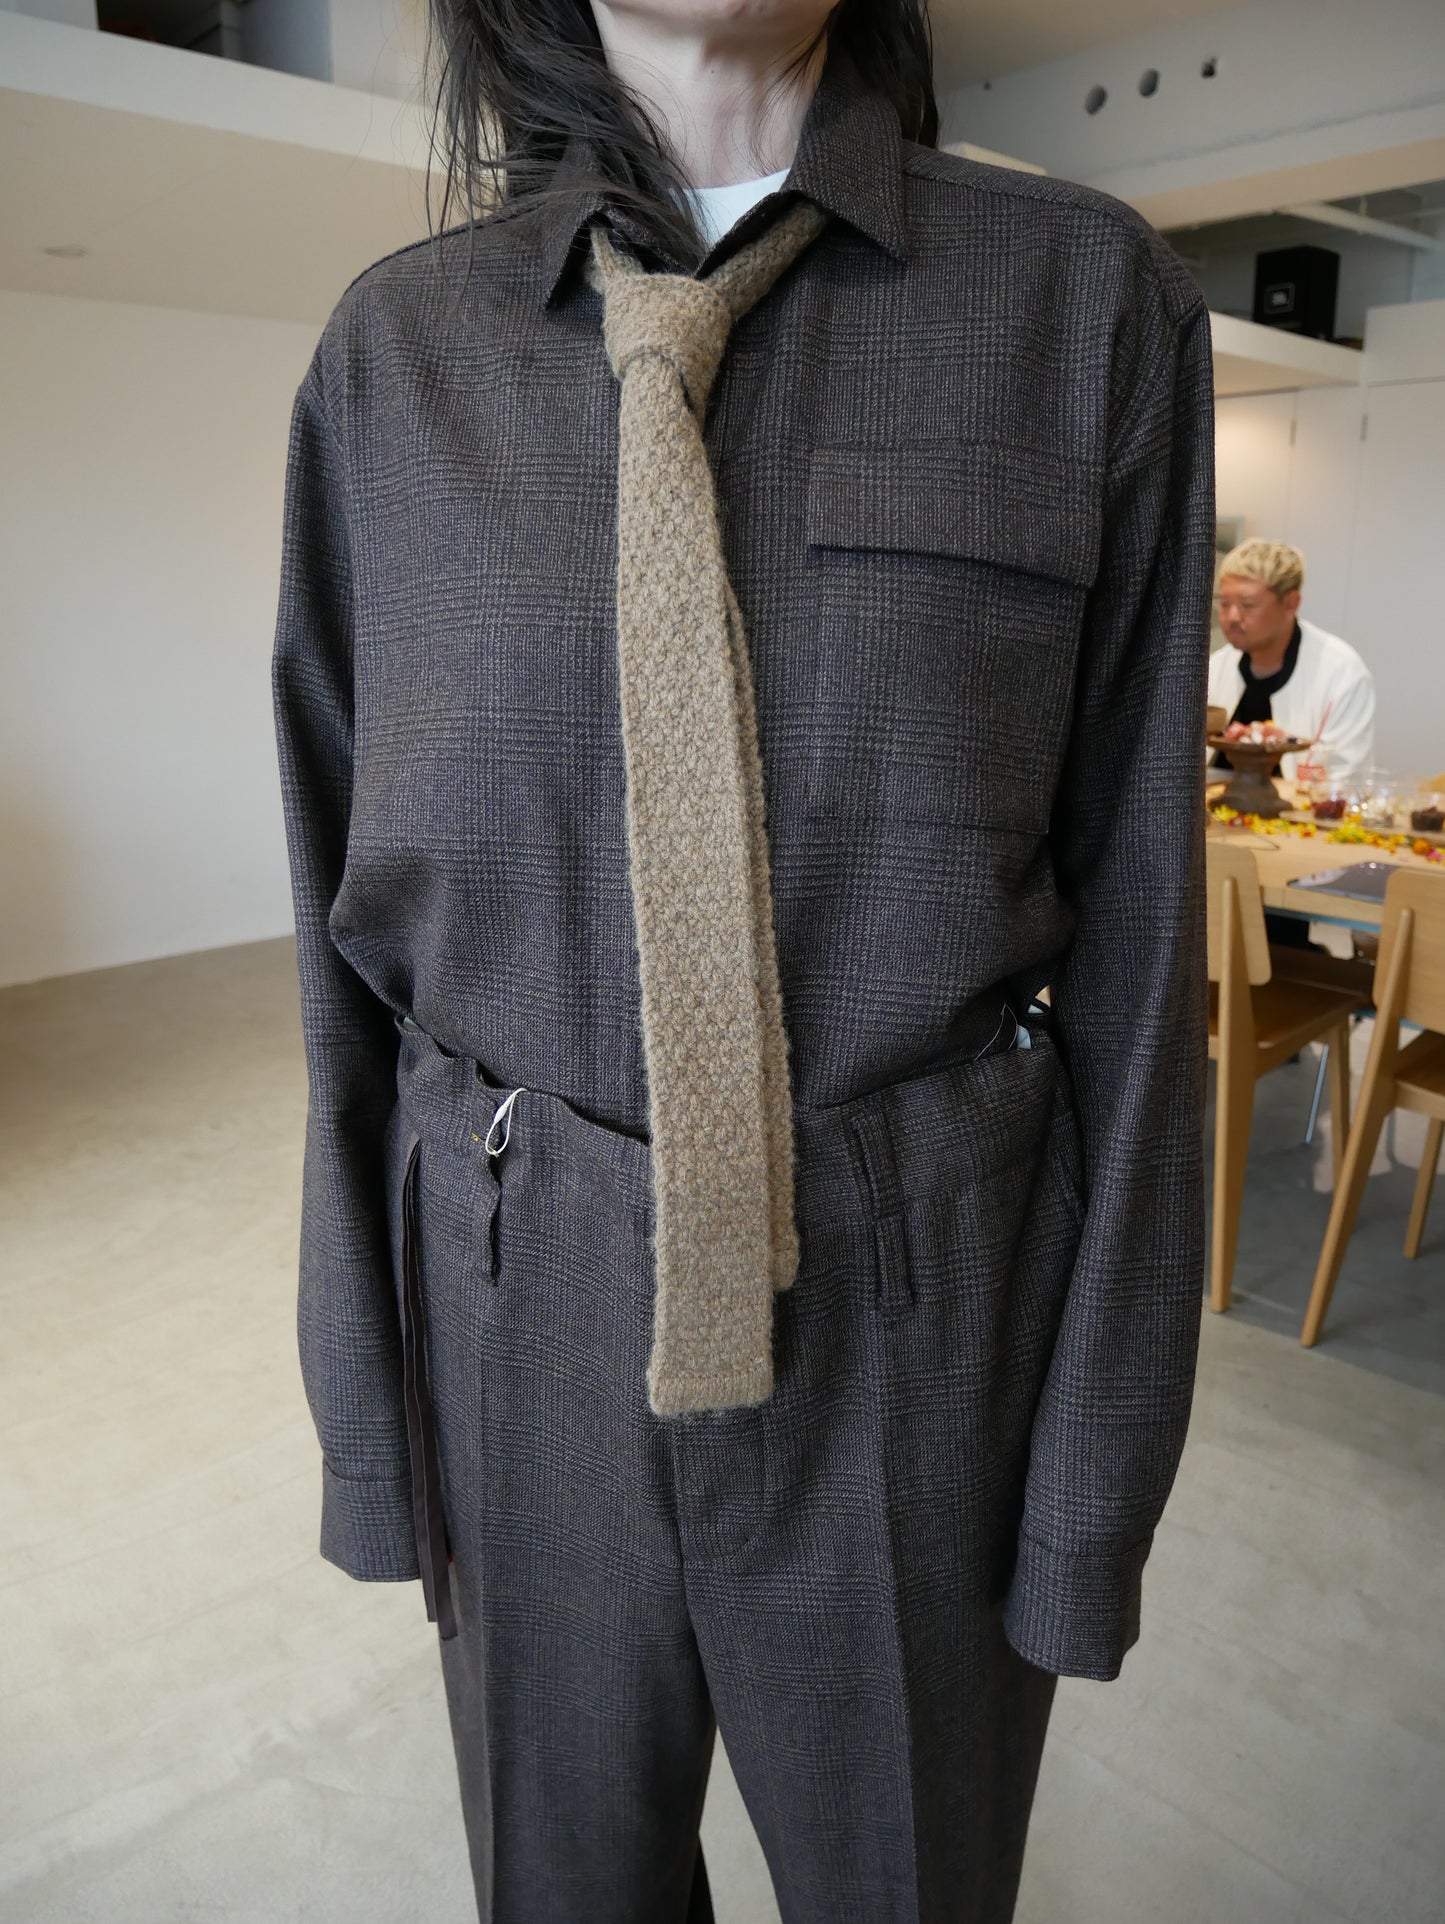 2way stretch wool shirts (checked brown/navy)